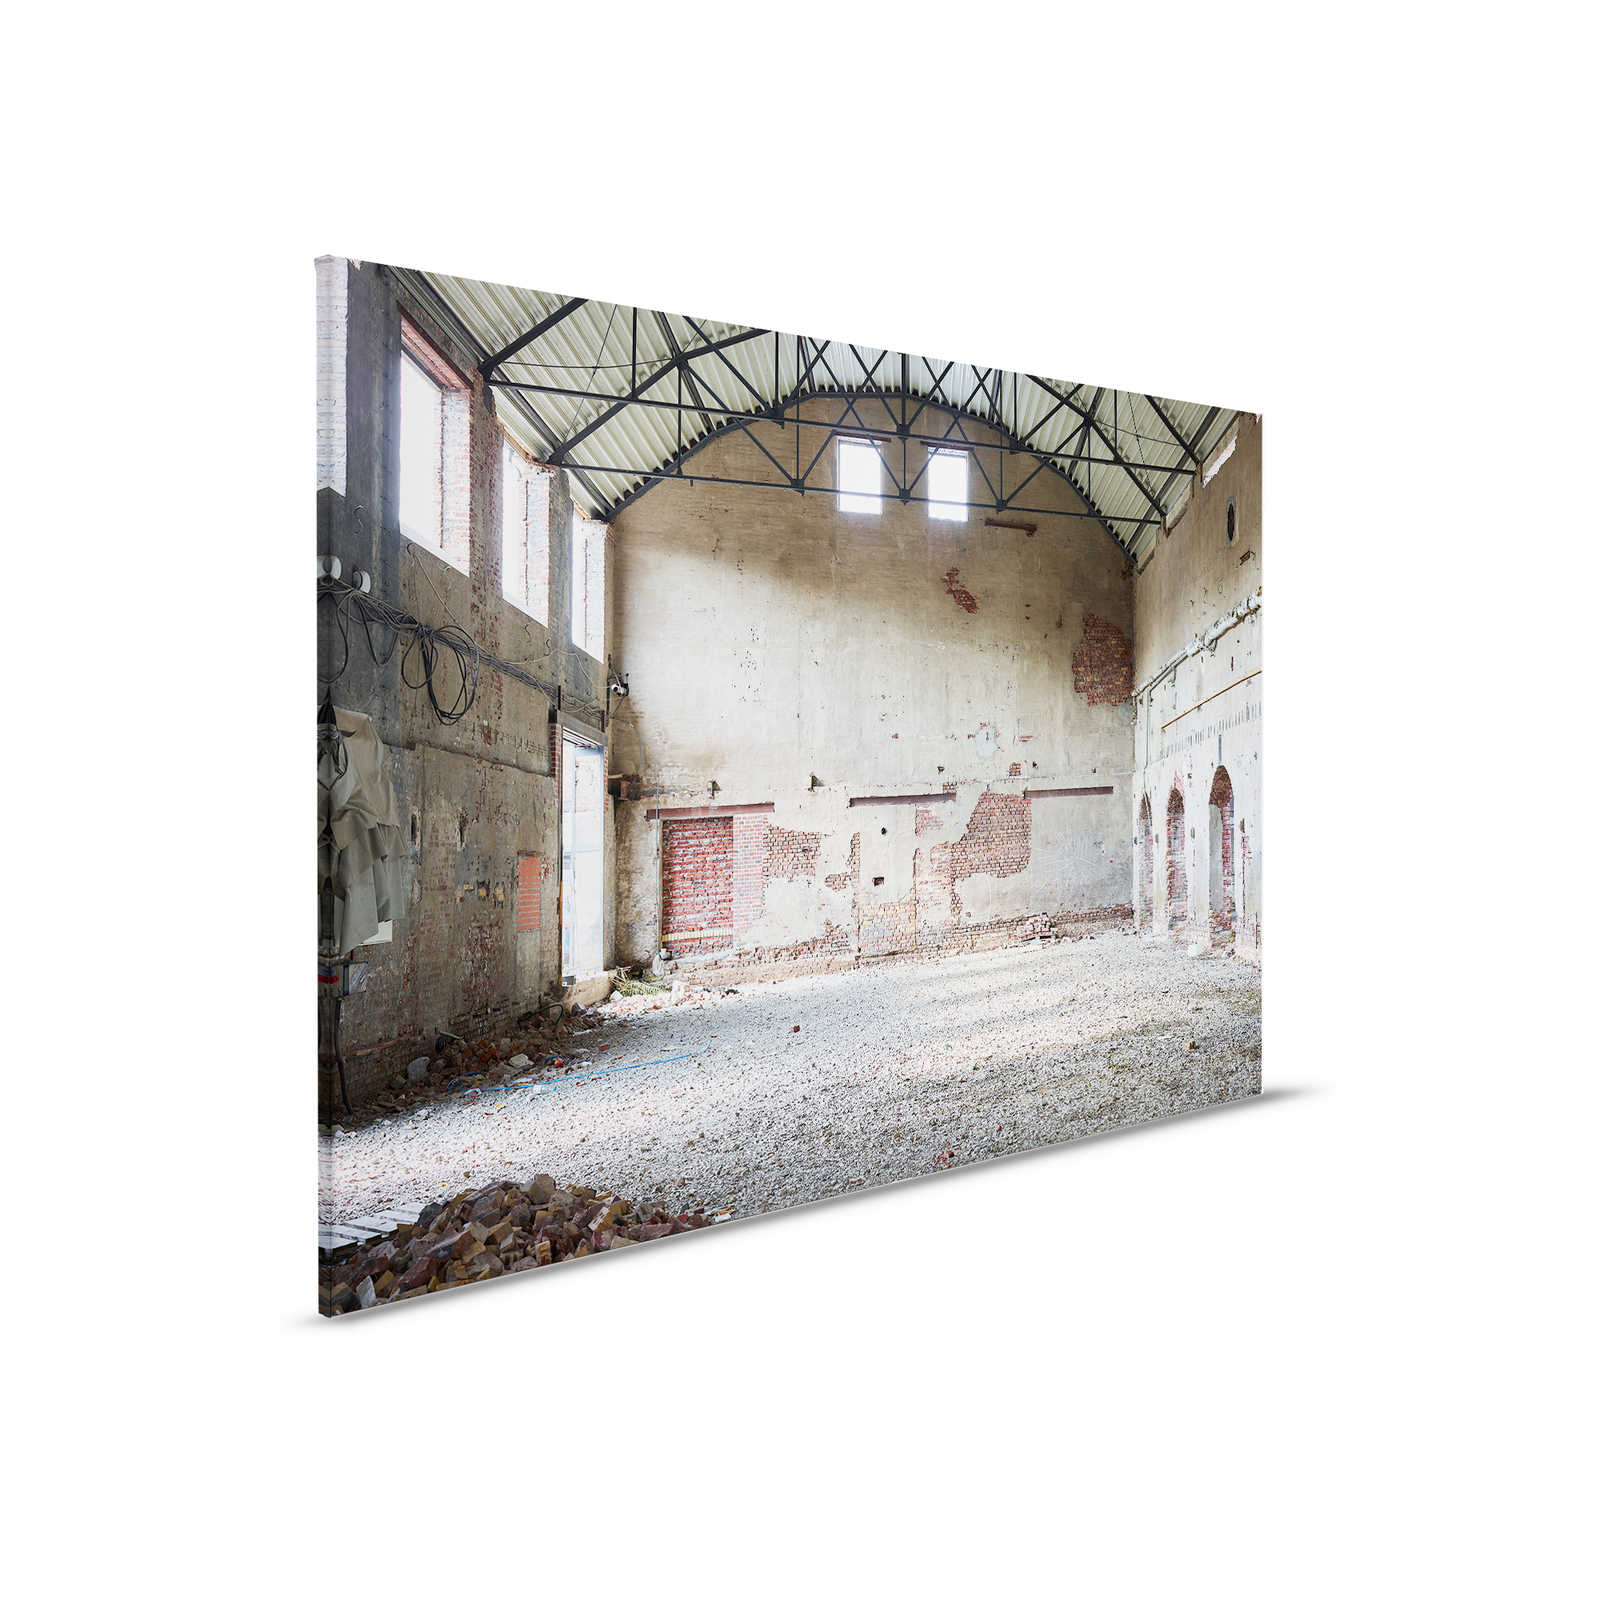         Canvas painting with abandoned industrial hall - 0.90 m x 0.60 m
    